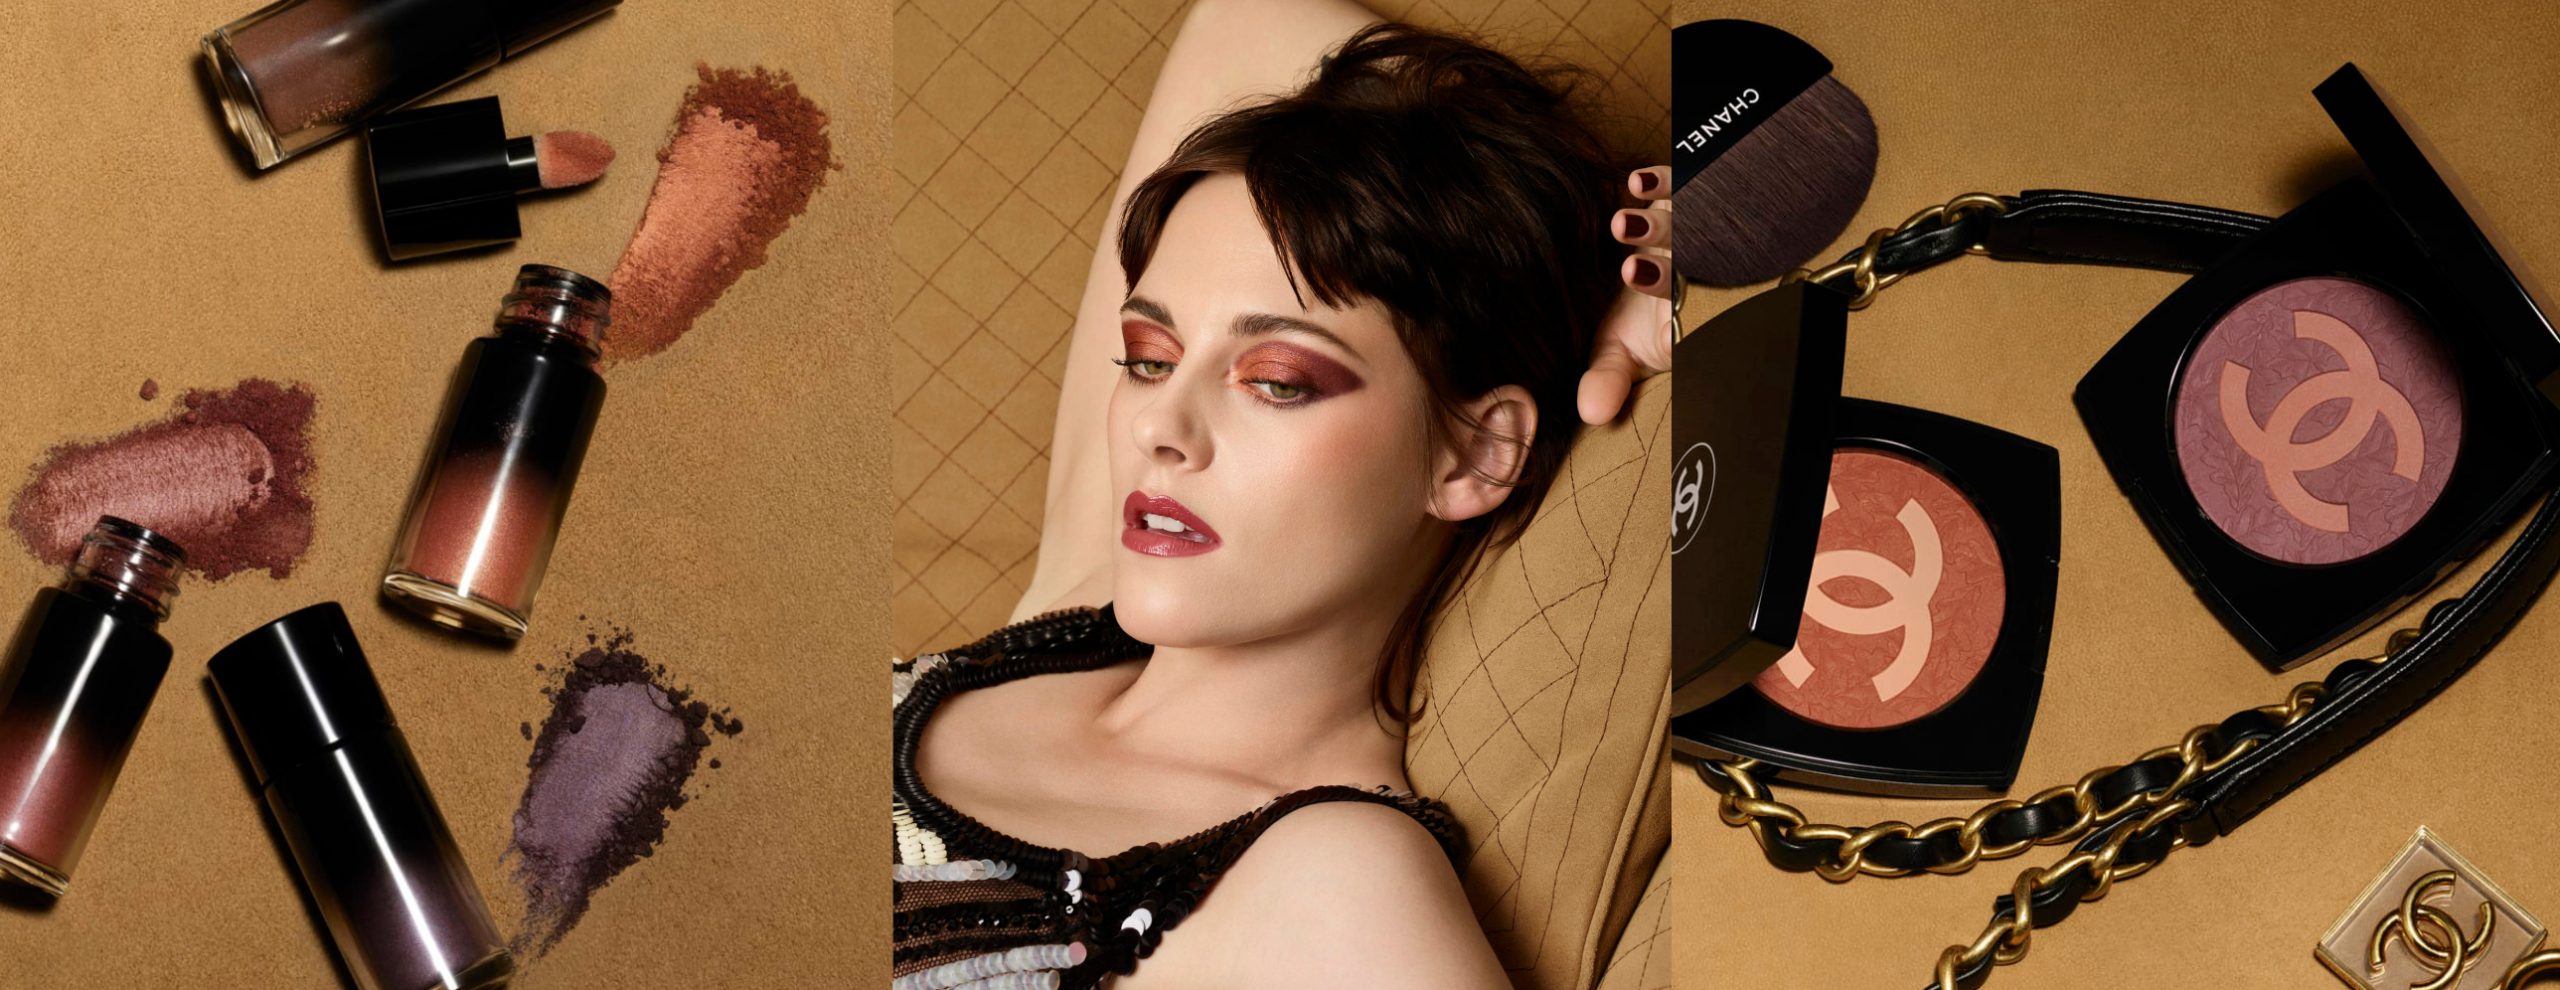 CHANEL Beauty Gives Us An Exquisite Équinoxe Makeup Collection For Fall